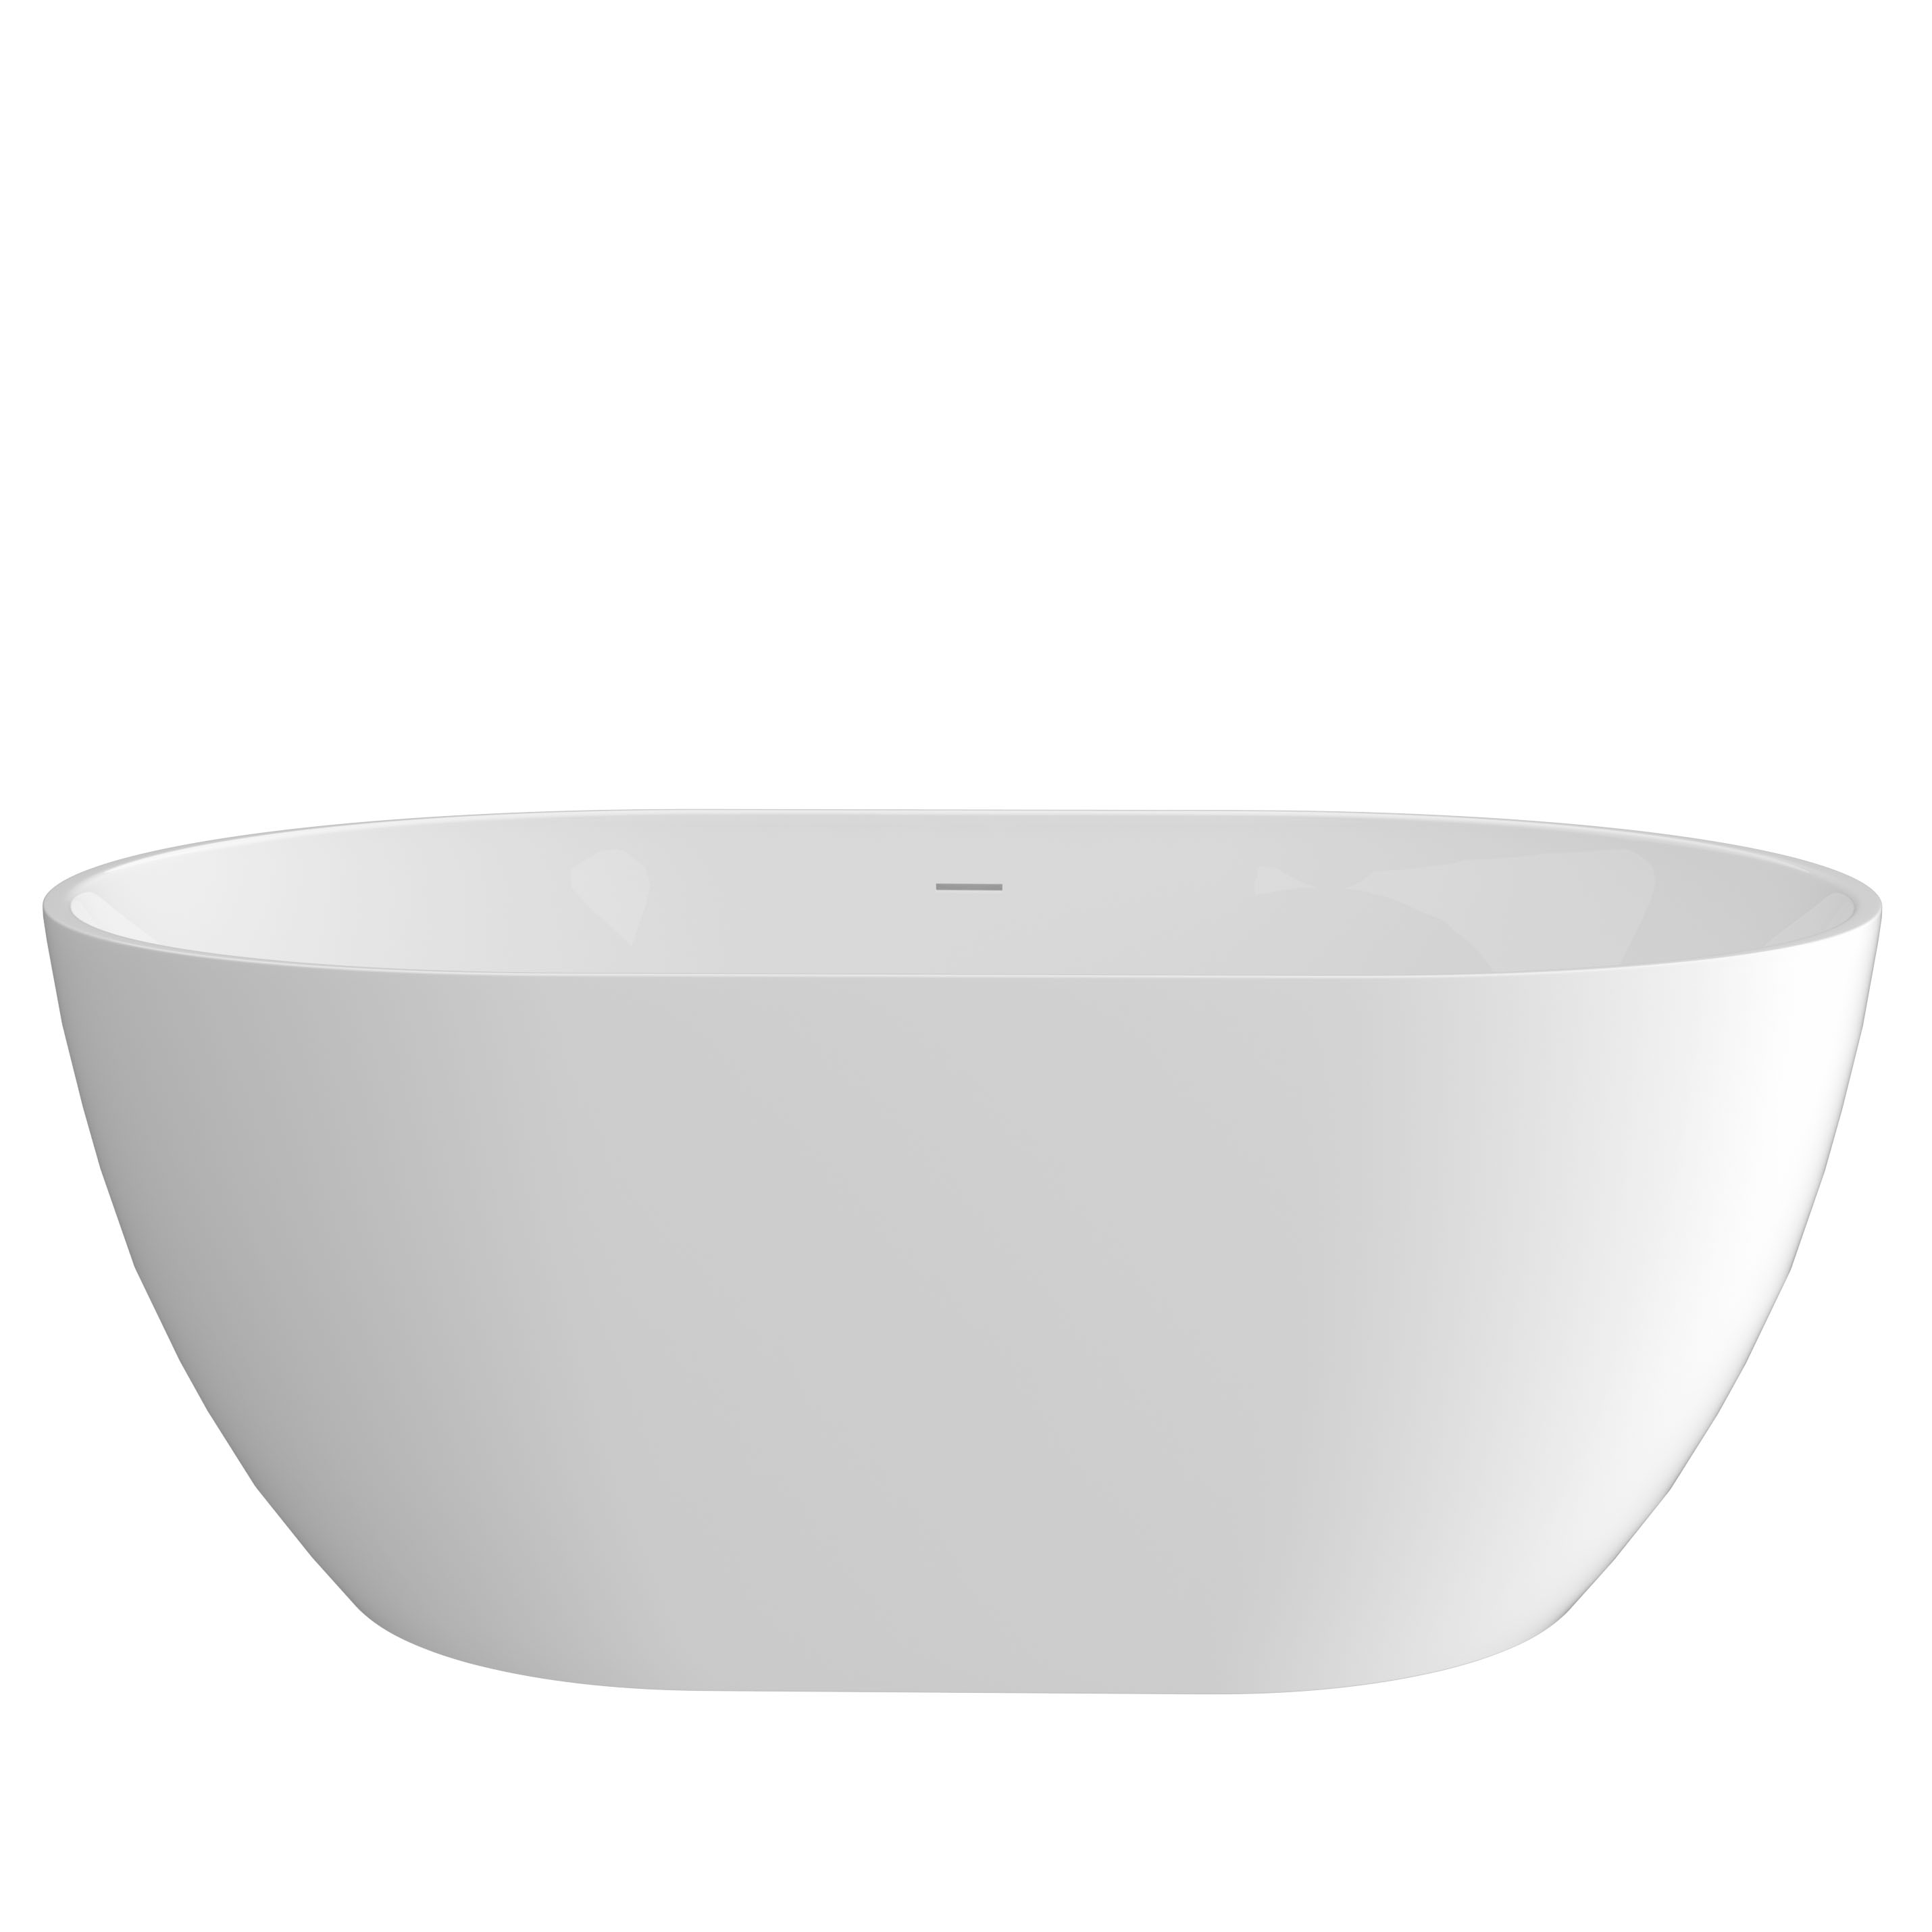 51" Acrylic Free Standing Tub - Classic Oval Shape Soaking Tub, Adjustable Freestanding Bathtub with Integrated Slotted Overflow and Chrome Pop-up Drain Anti-clogging Gloss White-CASAINC